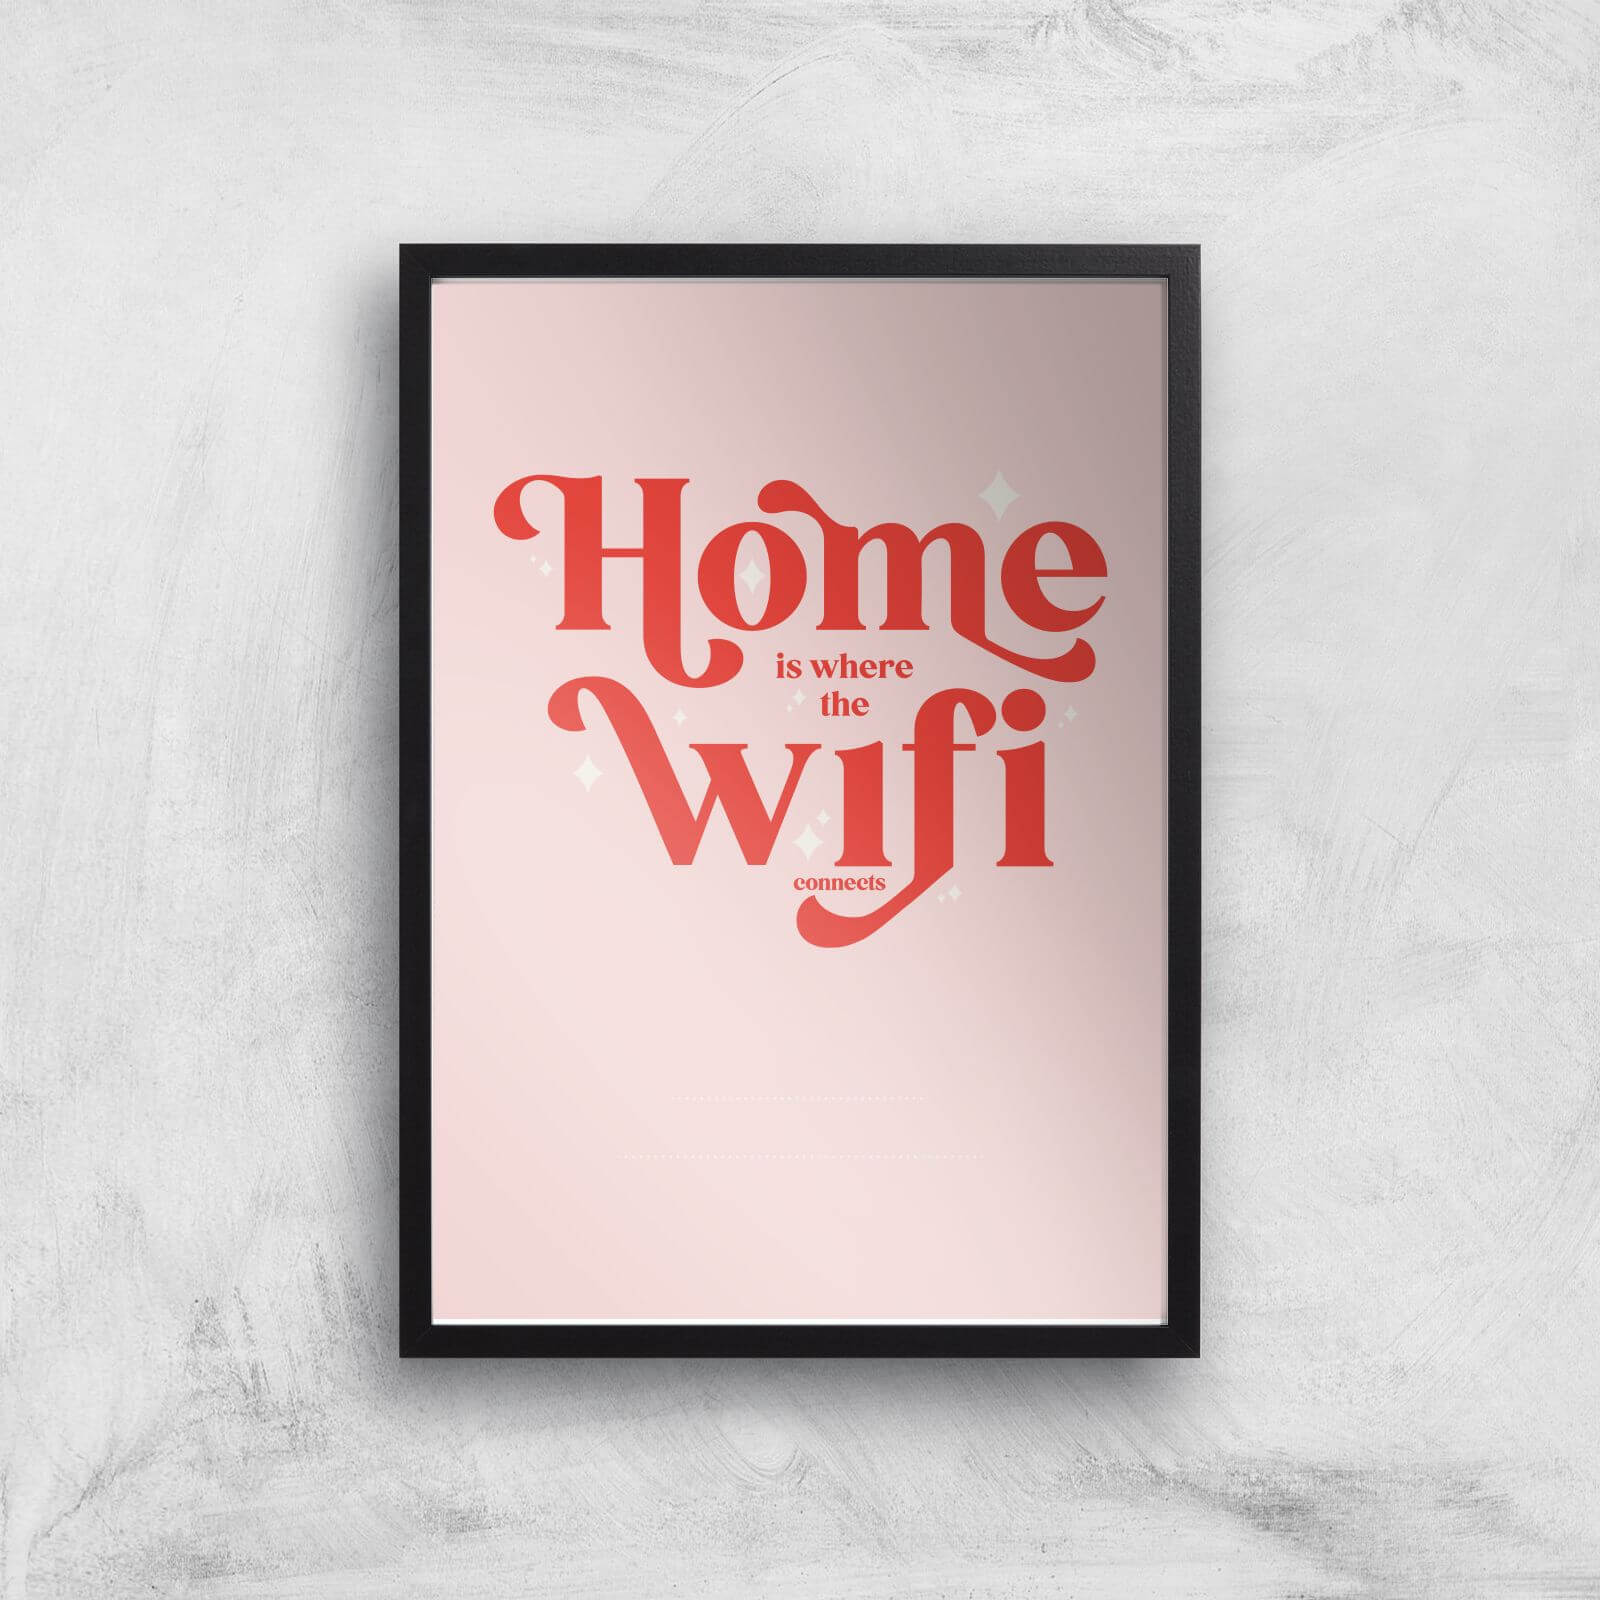 Hermione Chantal Light Home Is Where The Wifi Is Giclee Art Print - A2 - Black Frame